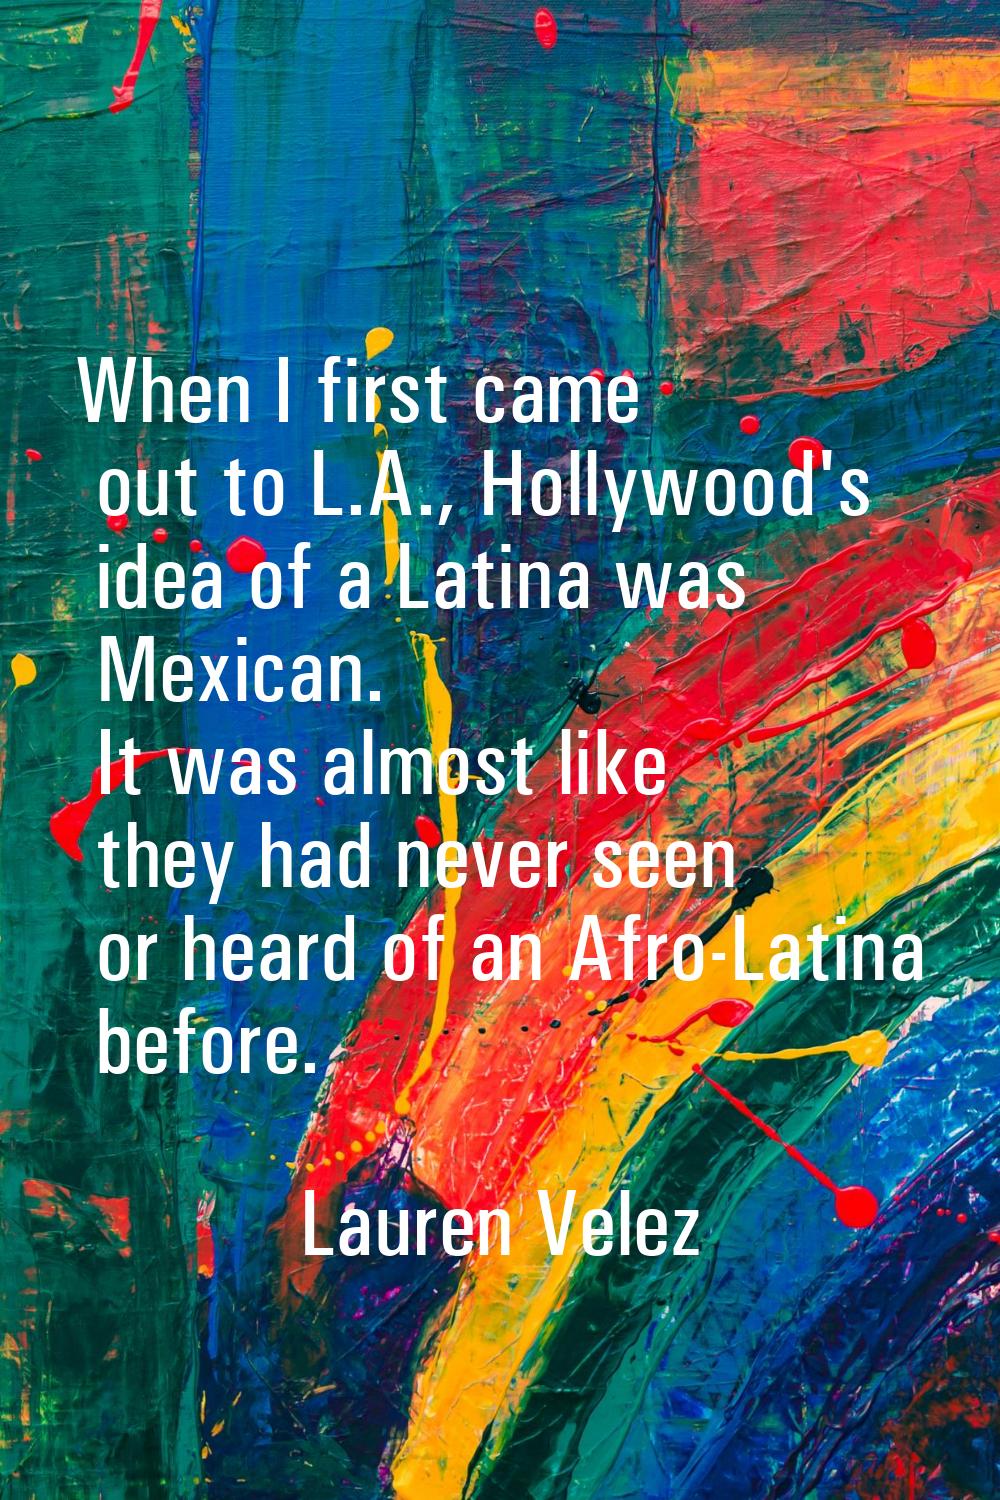 When I first came out to L.A., Hollywood's idea of a Latina was Mexican. It was almost like they ha